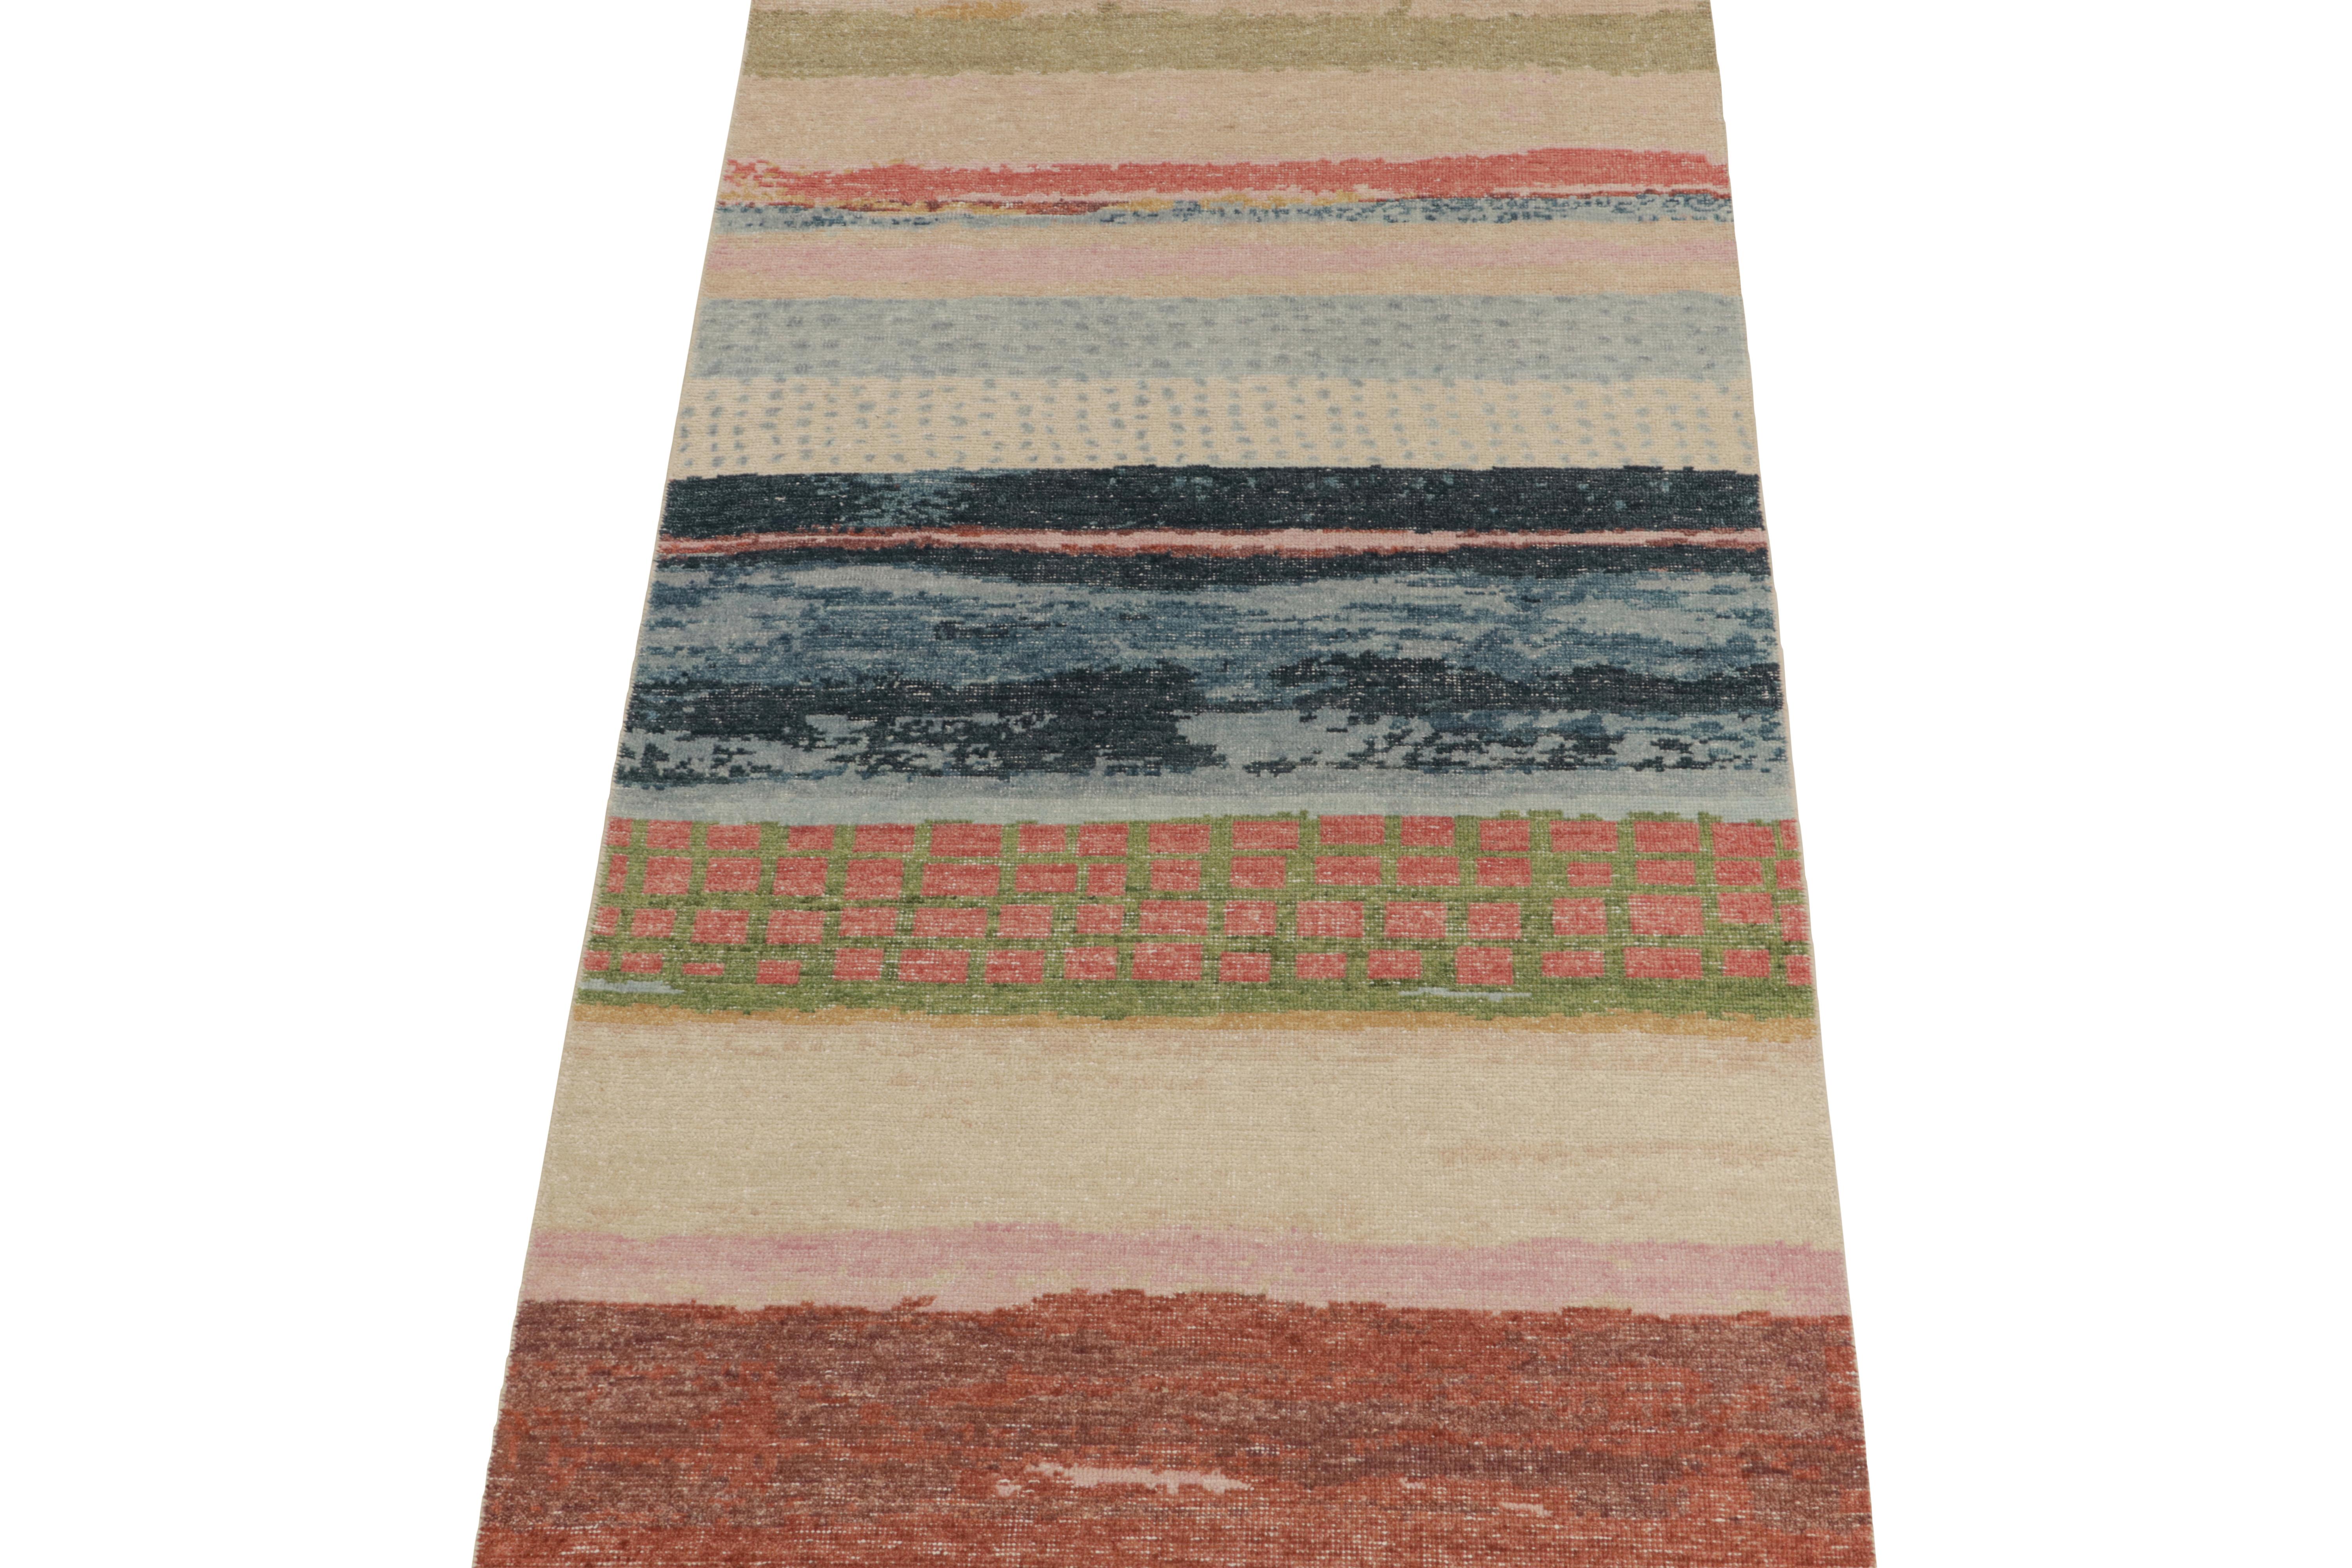 This contemporary 4x8 abstract rug is a new addition to the Homage Collection by Rug & Kilim. Hand-knotted in wool and cotton.

Further On the Design:

This design enjoys a splash of colors with horizontal stripes, dots, and other painterly patterns